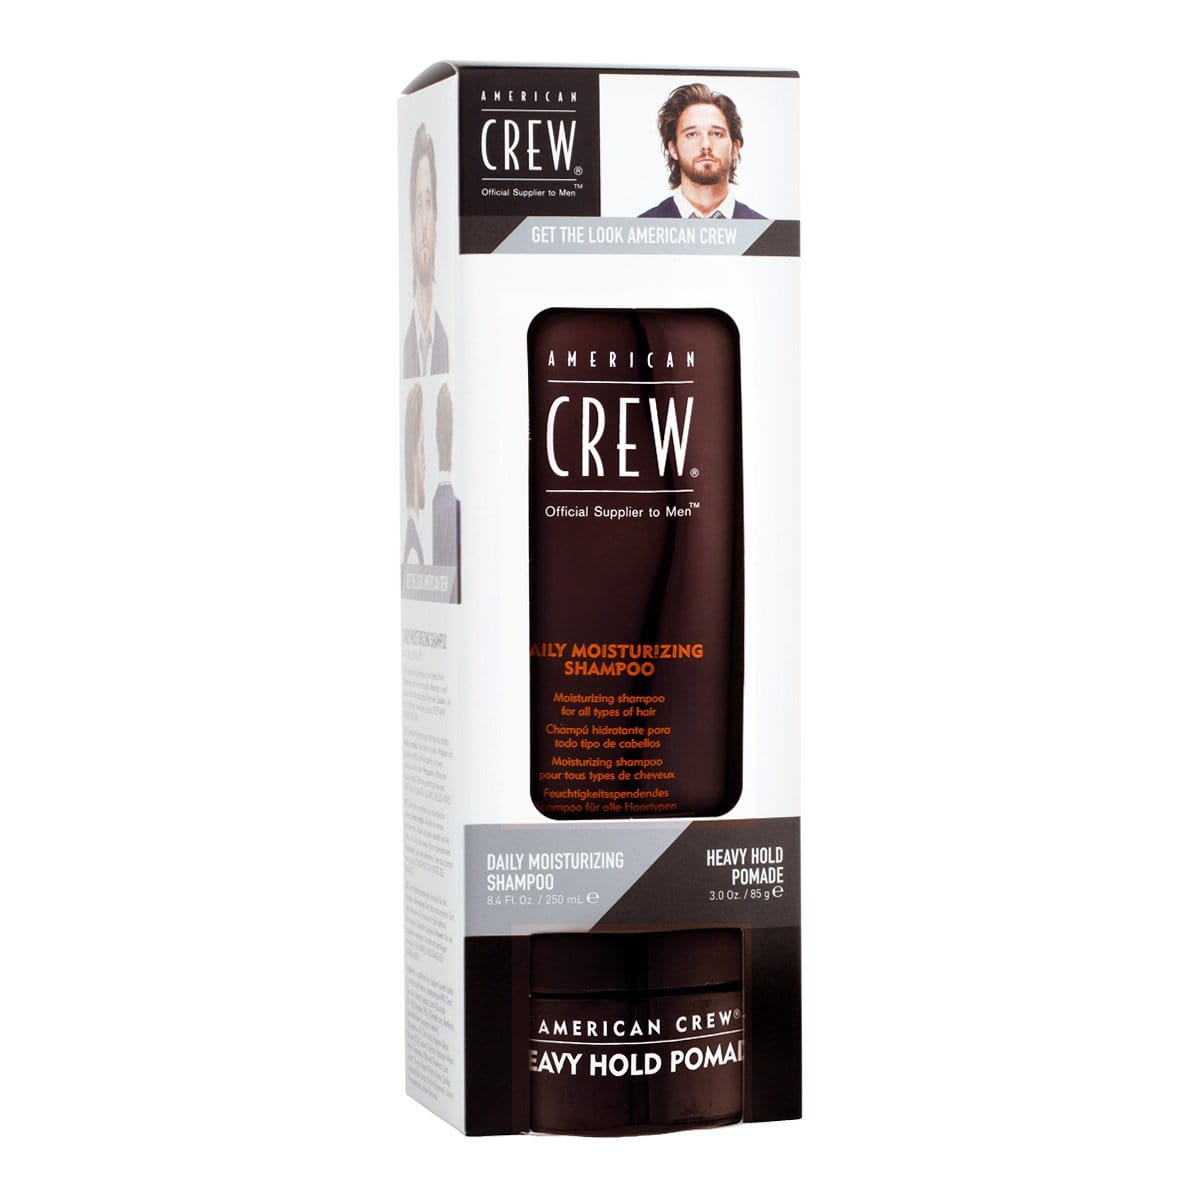 AMERICAN CREW_Daily Moisturizing Shampoo & Firm Hold Styling Gel Gift Set_Cosmetic World